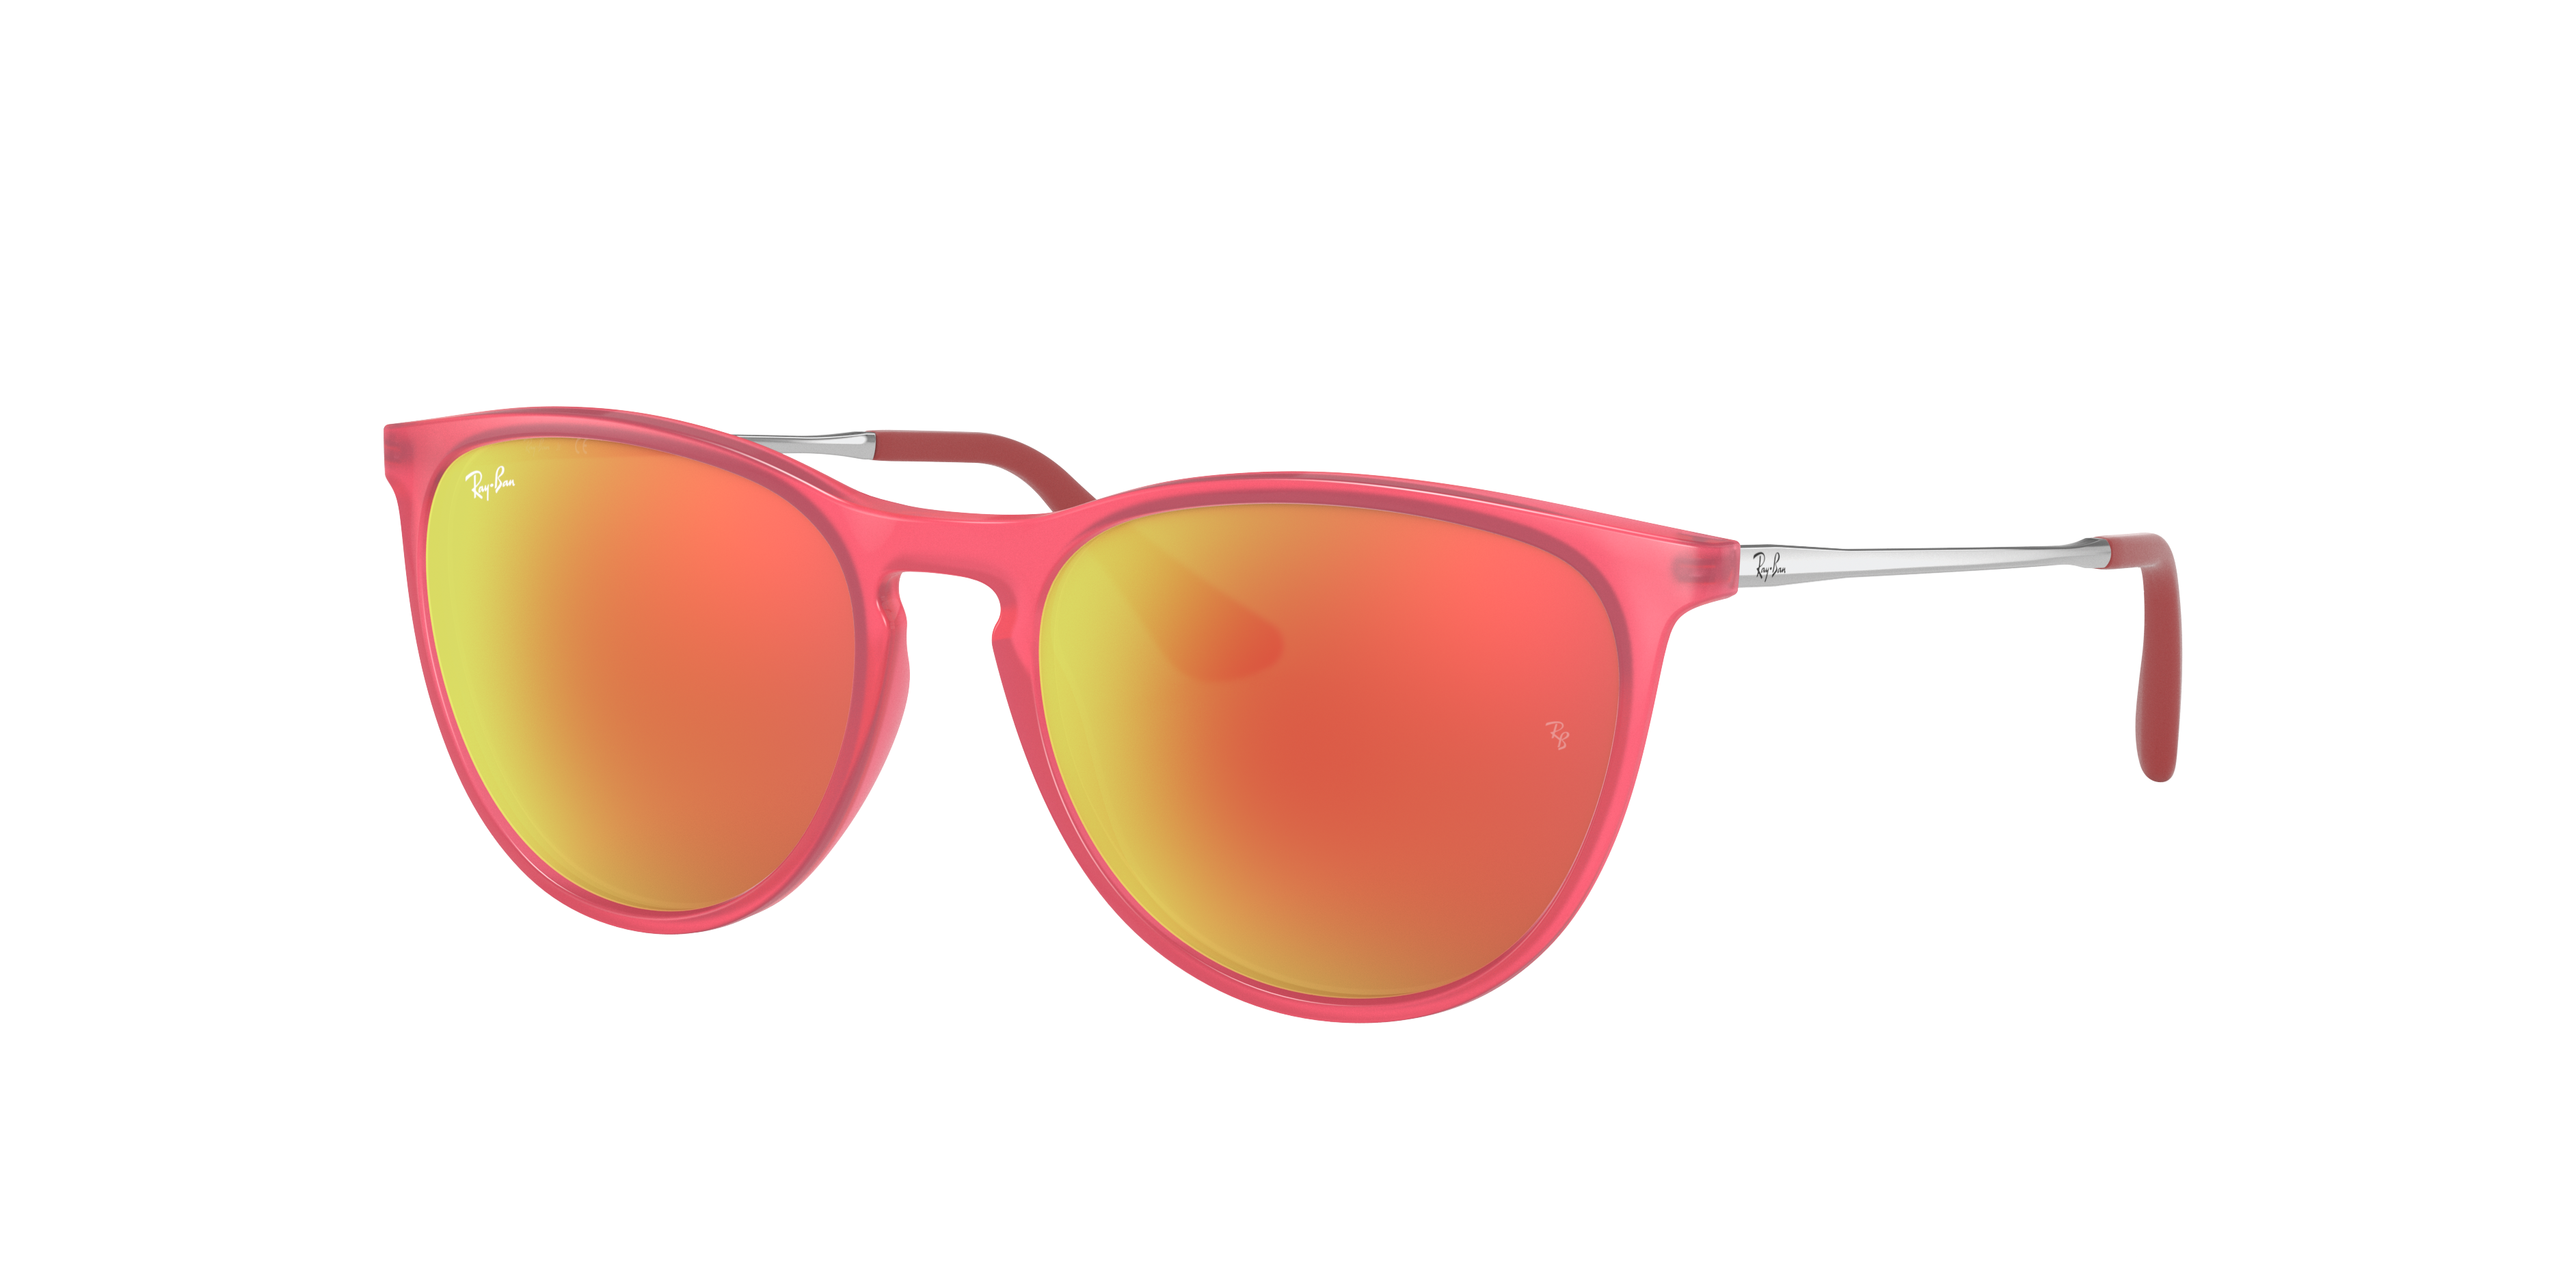 ray ban sunglasses red lenses